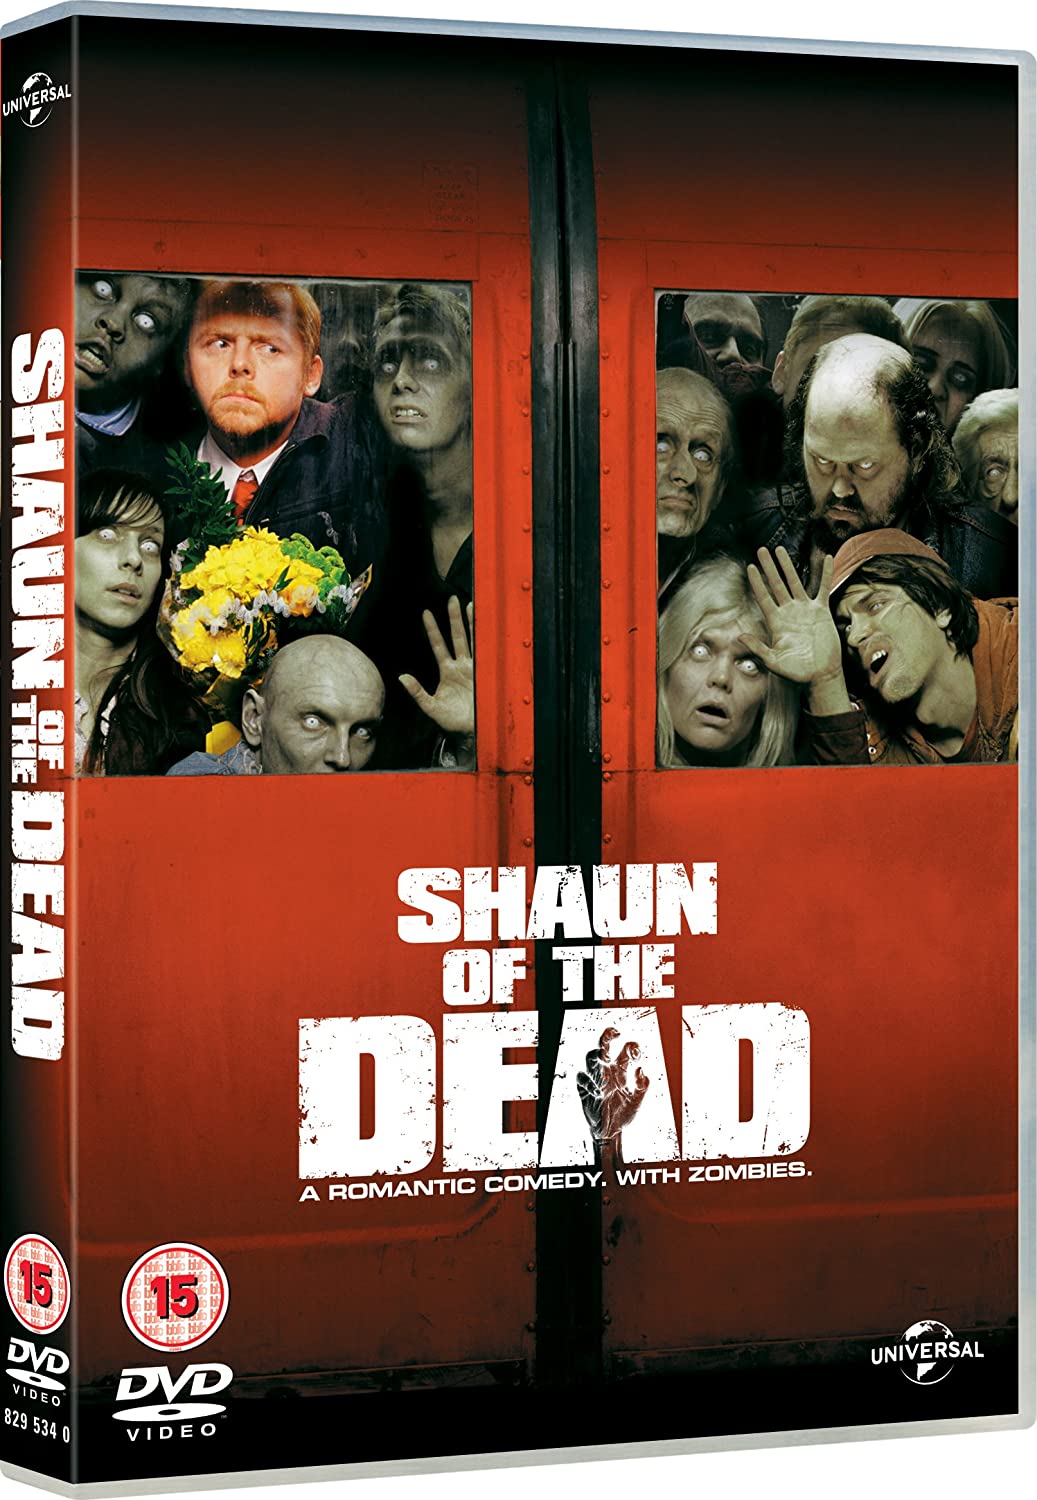 The World's End/Hot Fuzz/Shaun Of The Dead (Blu-ray) – Warner Bros 